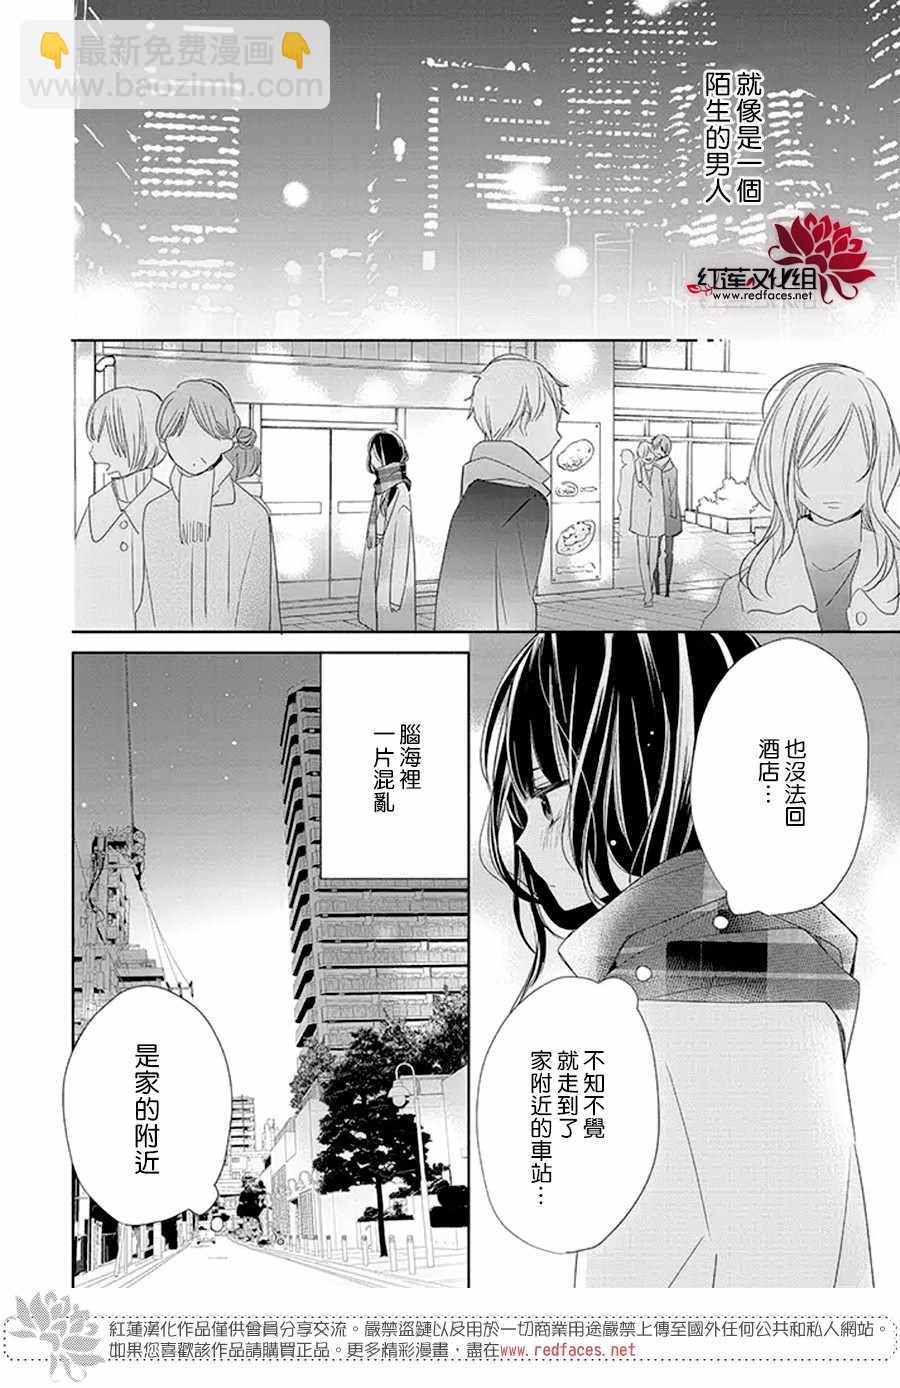 If given a second chance - 18话 - 5